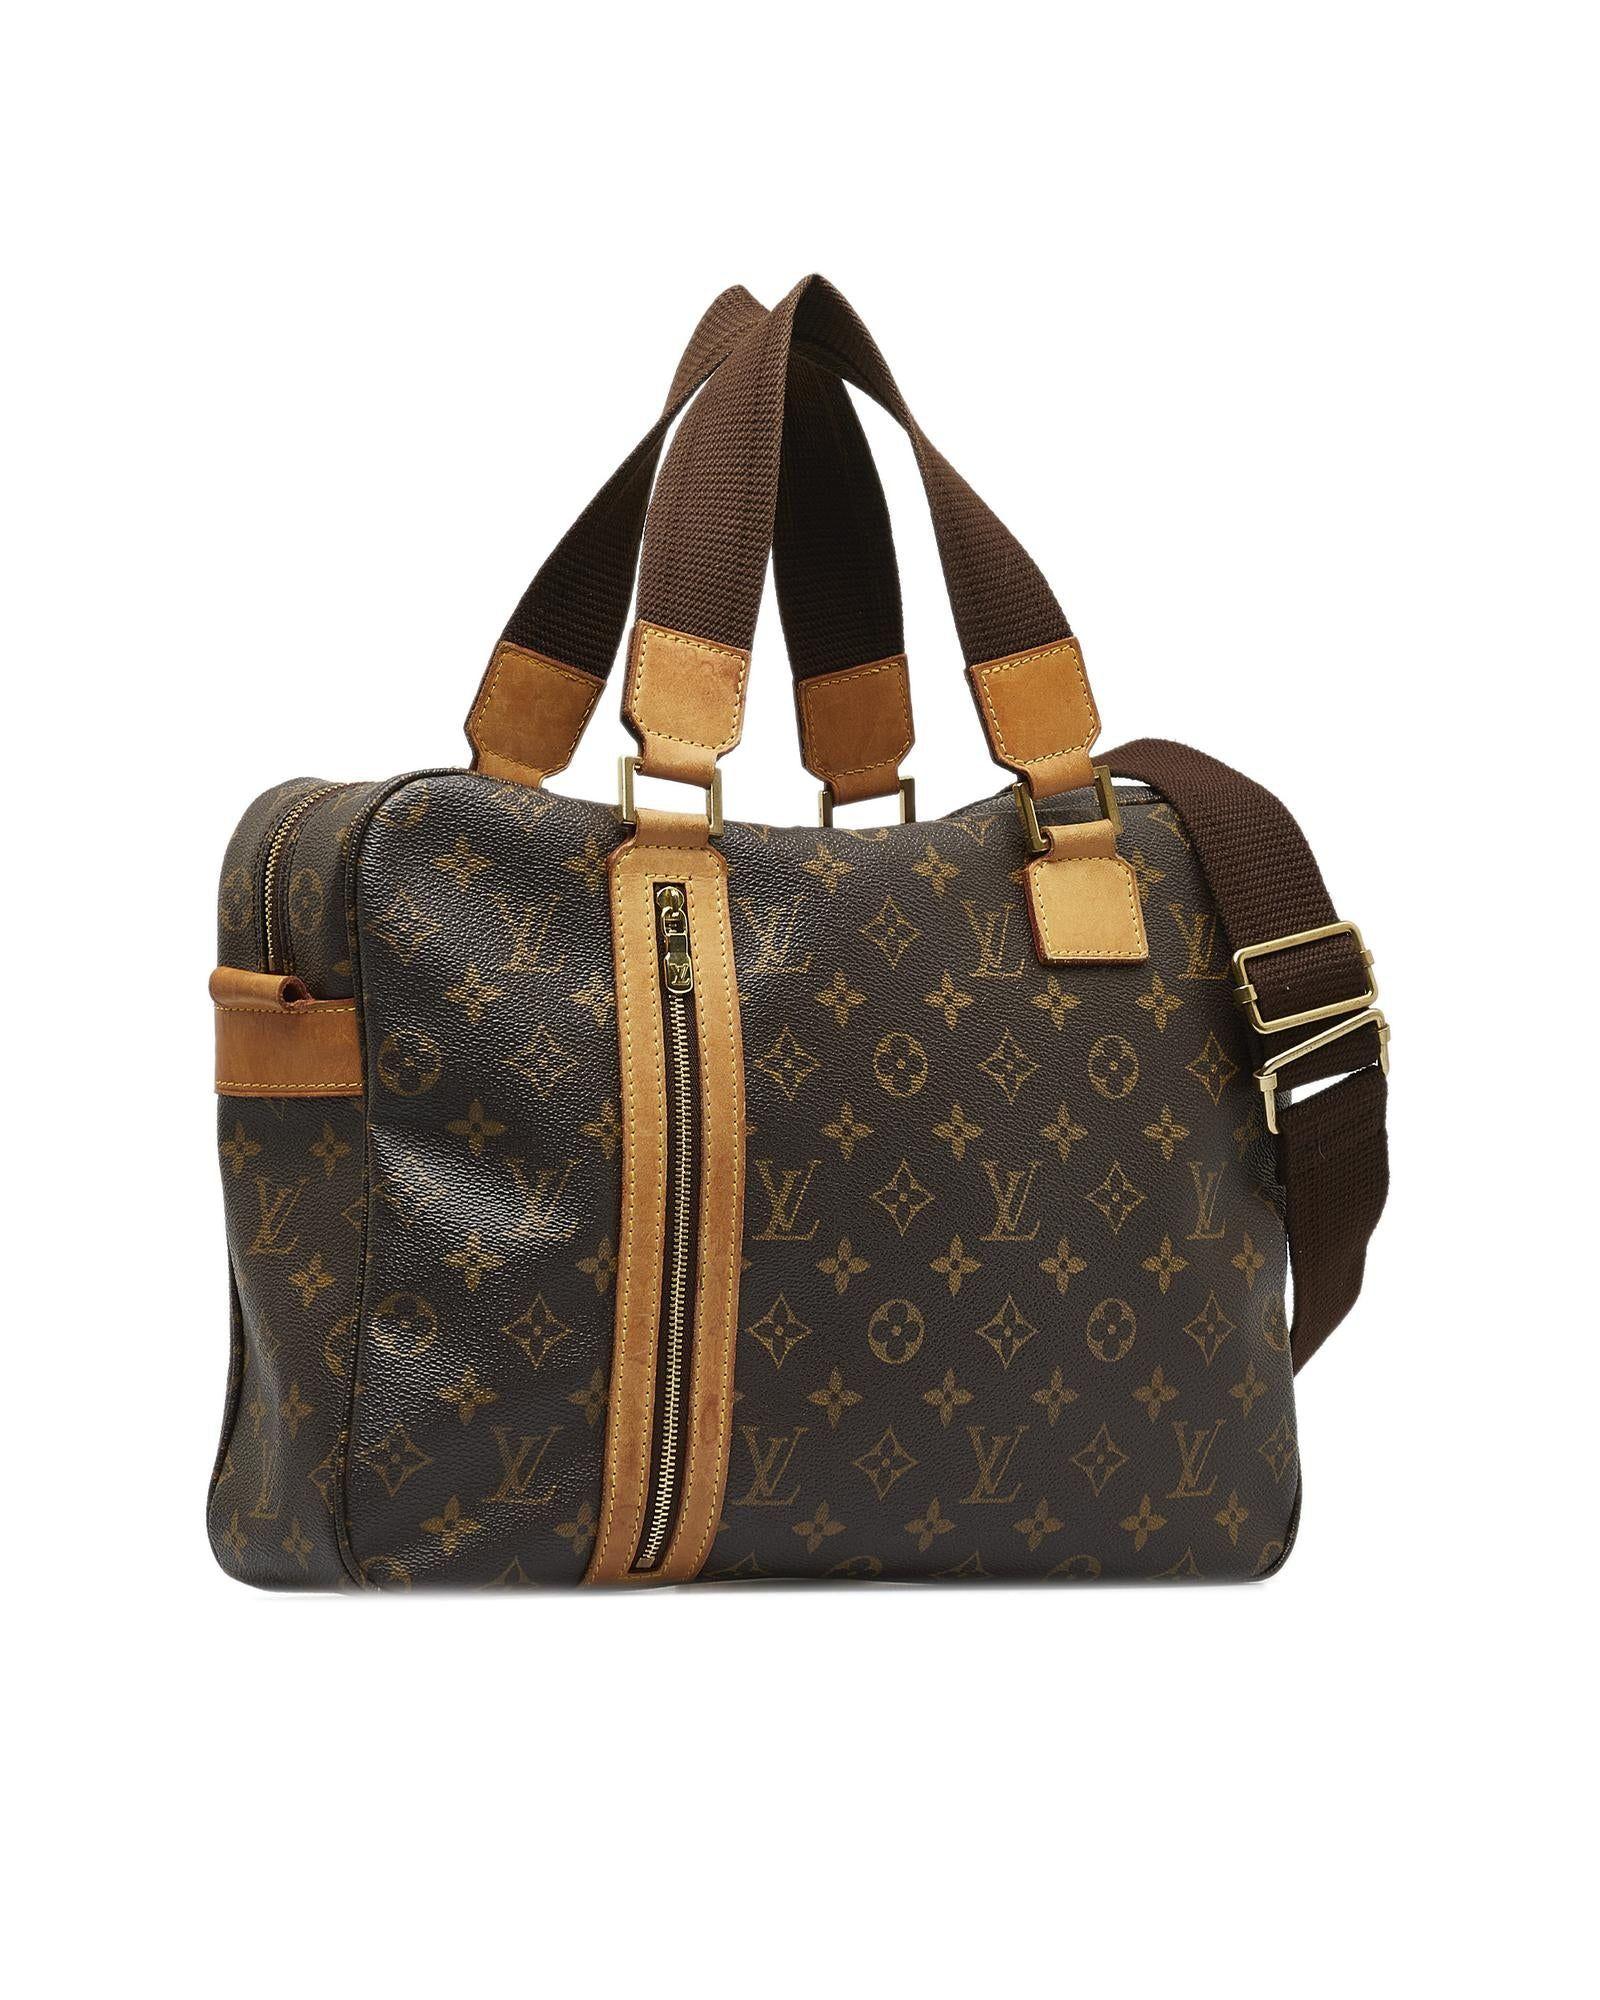 Louis Vuitton Canvas Sac With Leather Trim And Multiple Pockets in